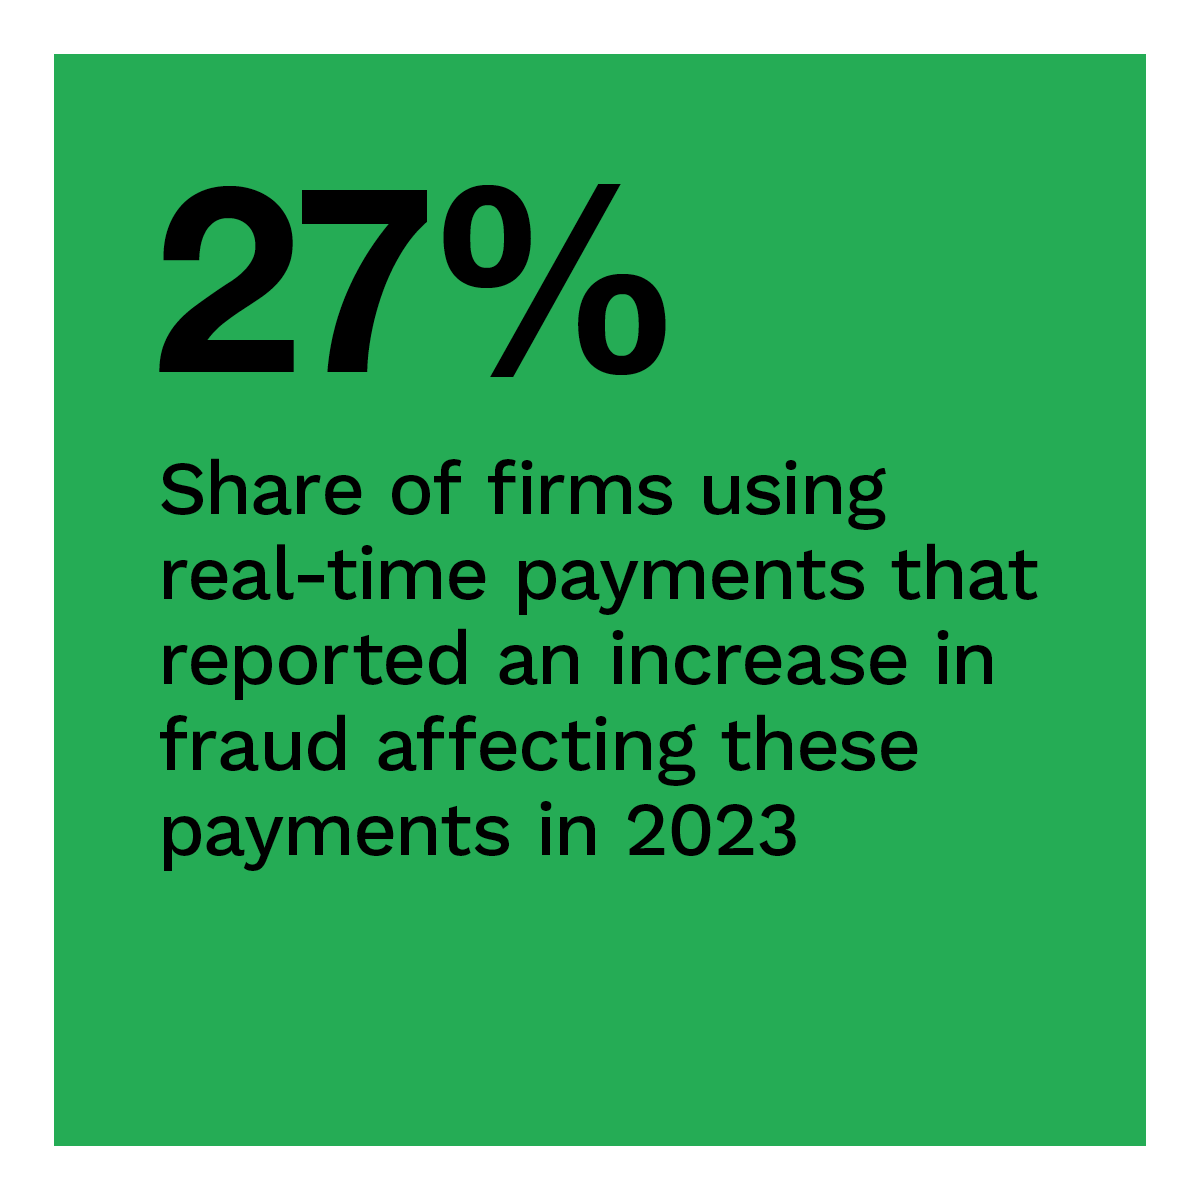 27%: Share of firms using real-time payments that reported an increase in fraud affecting these payments in 2023